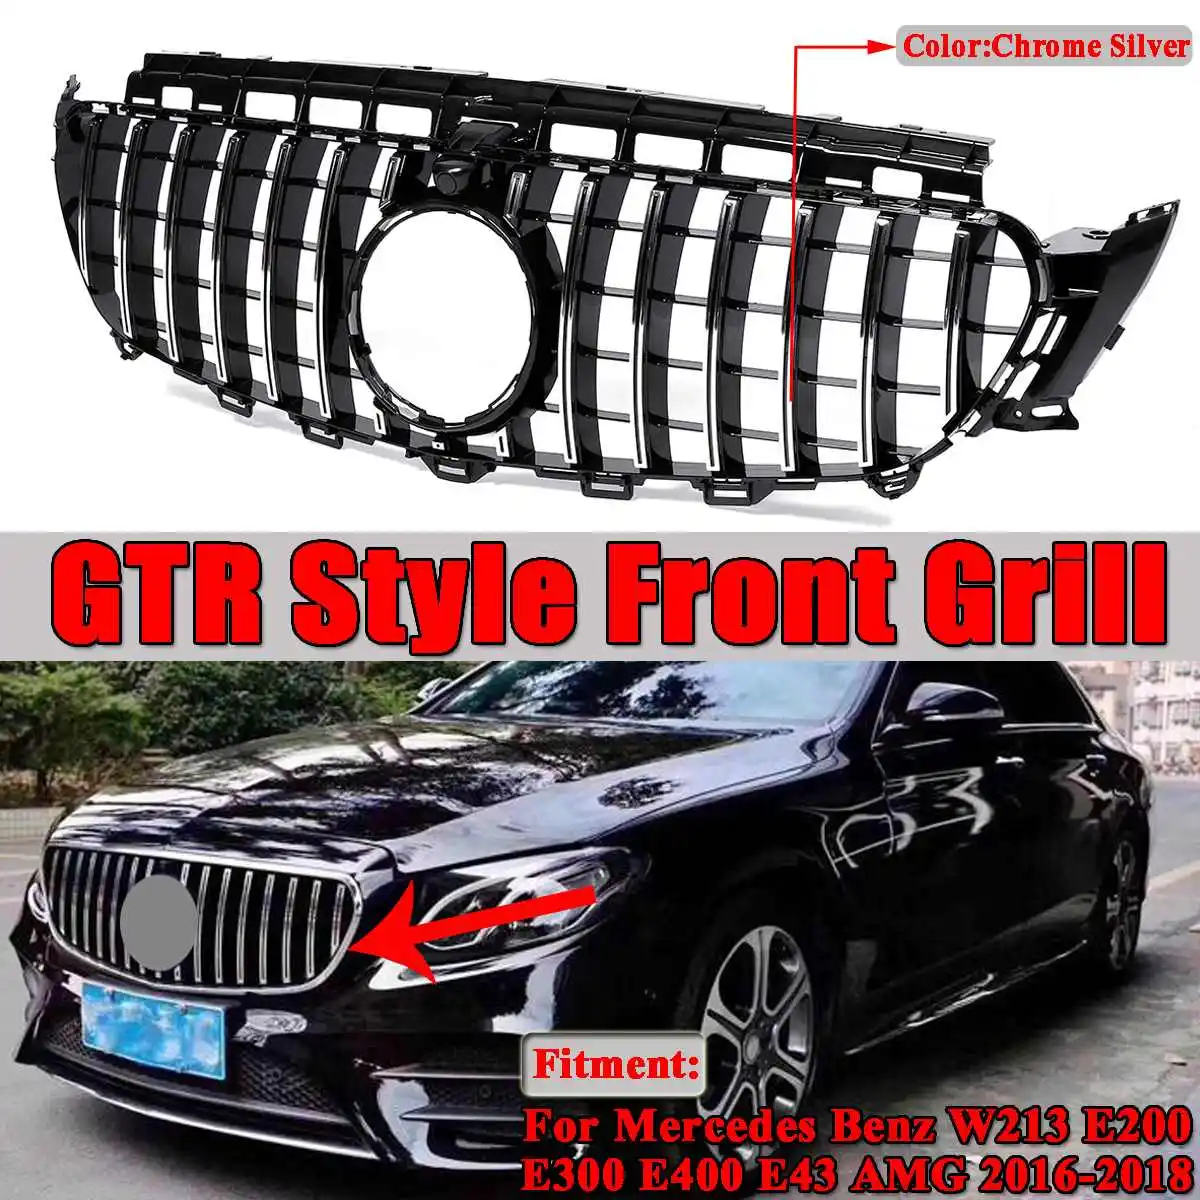 

W213 Grlil GT R / Diamond Style Car Front Grille Grill For Mercedes For Benz W213 E200 E300 E400 E43 For AMG 2016-2019